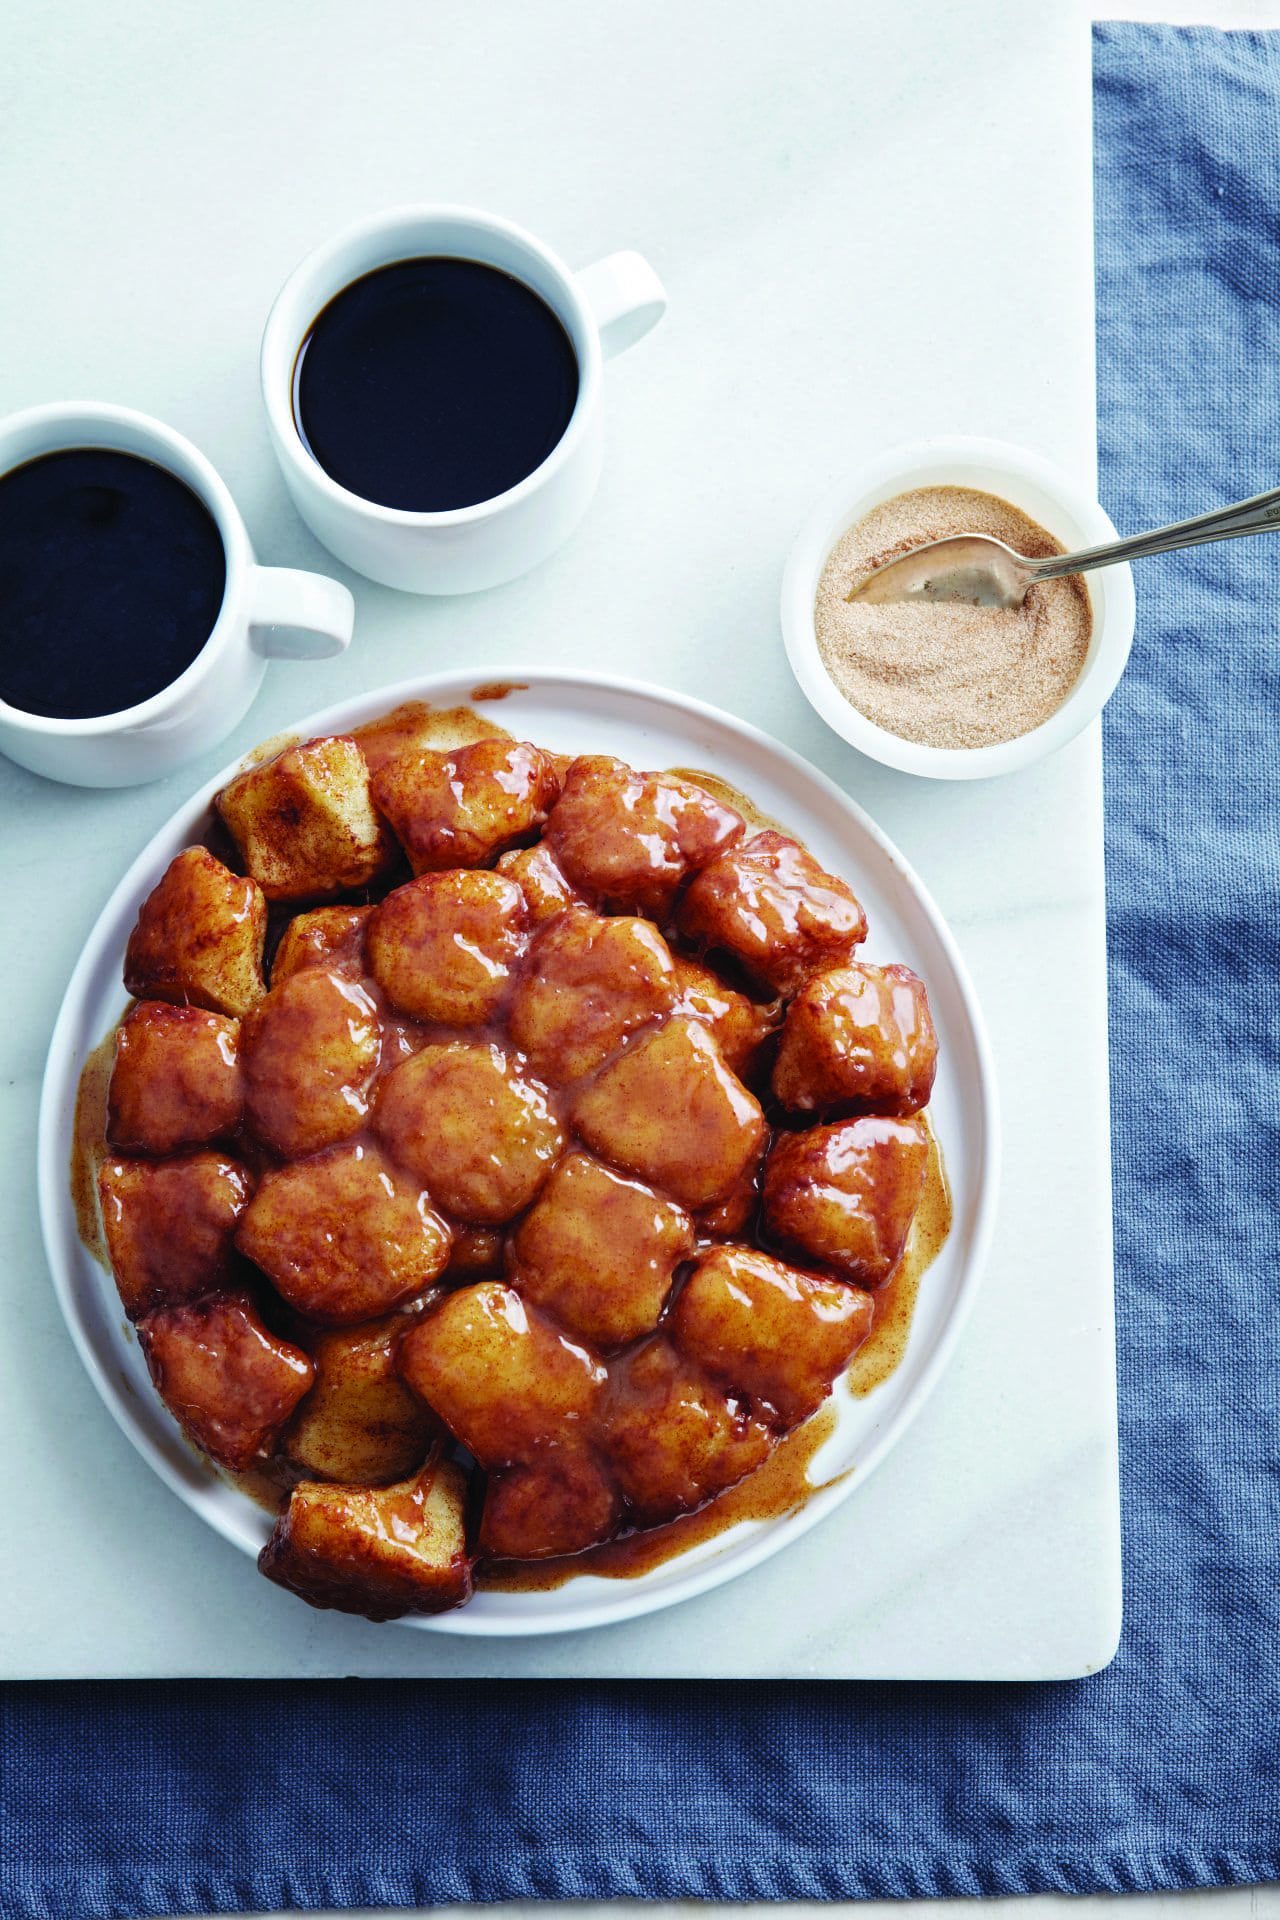 Joanne Chang's cinnamon sugar monkey bread, which is featured in her latest cookbook, "Baking with Less Sugar." (Courtesy Joseph De Leo)